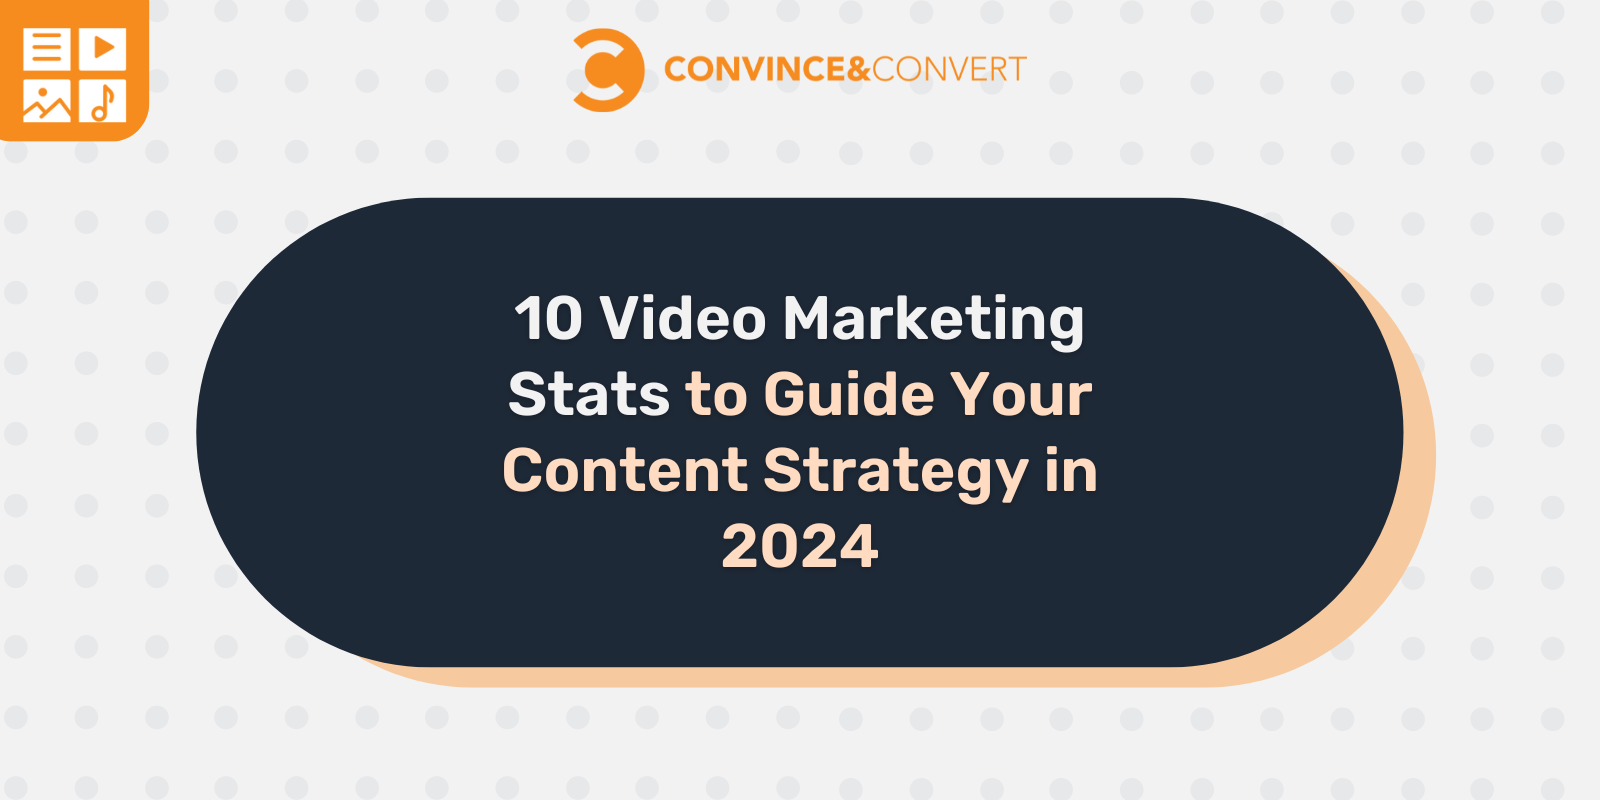 You are currently viewing 10 Video Marketing Stats to Guide Your Content Strategy in 2024